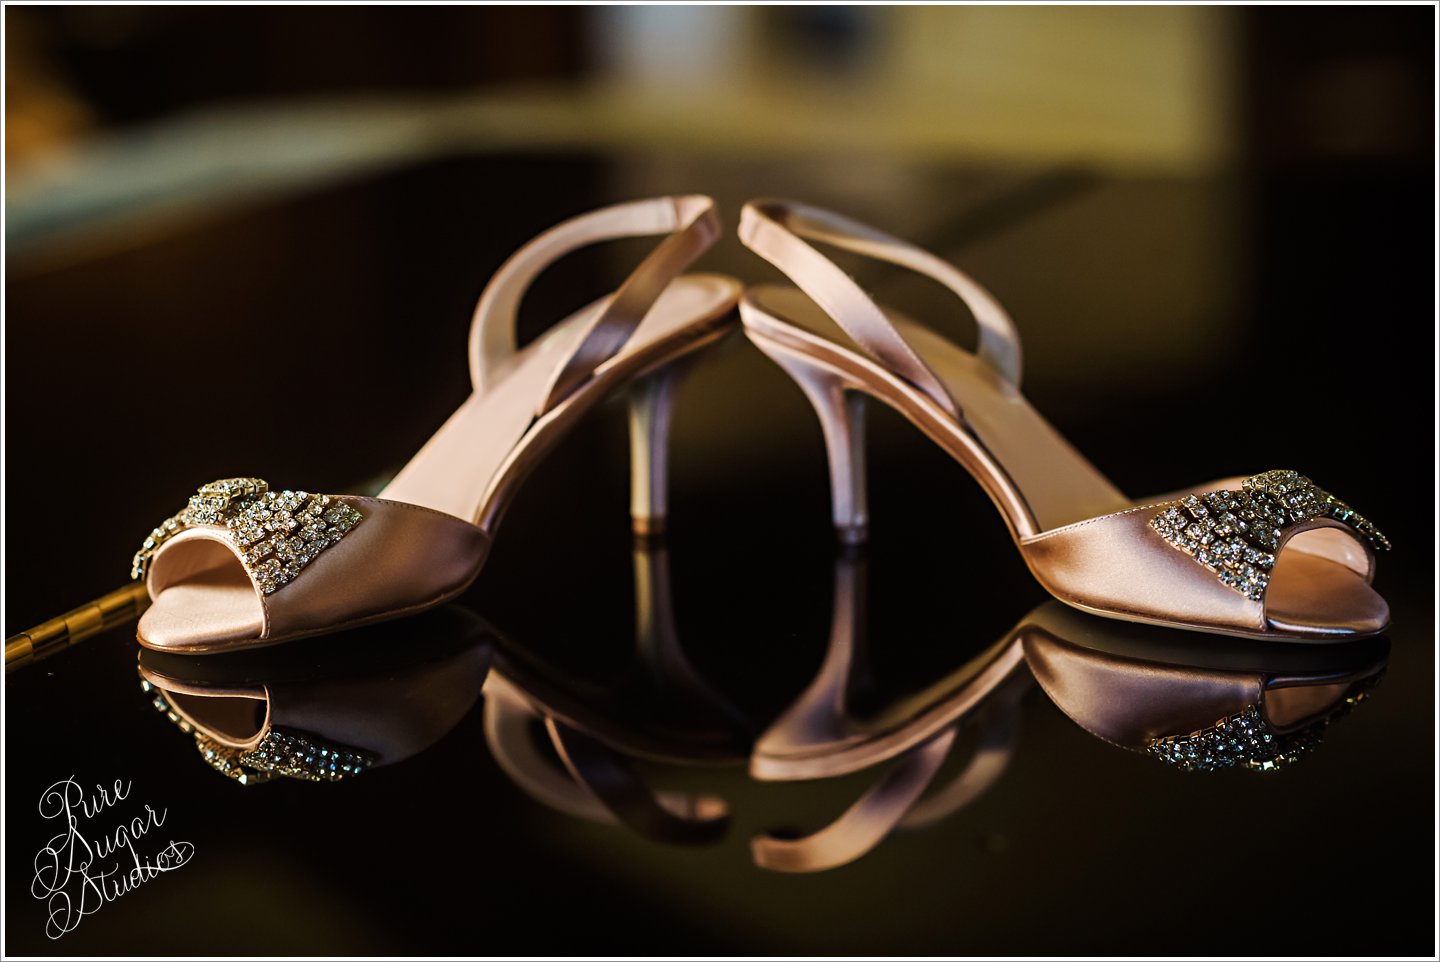 Blush Kate Spade shoes at Timuquana Country Club Wedding on their piano